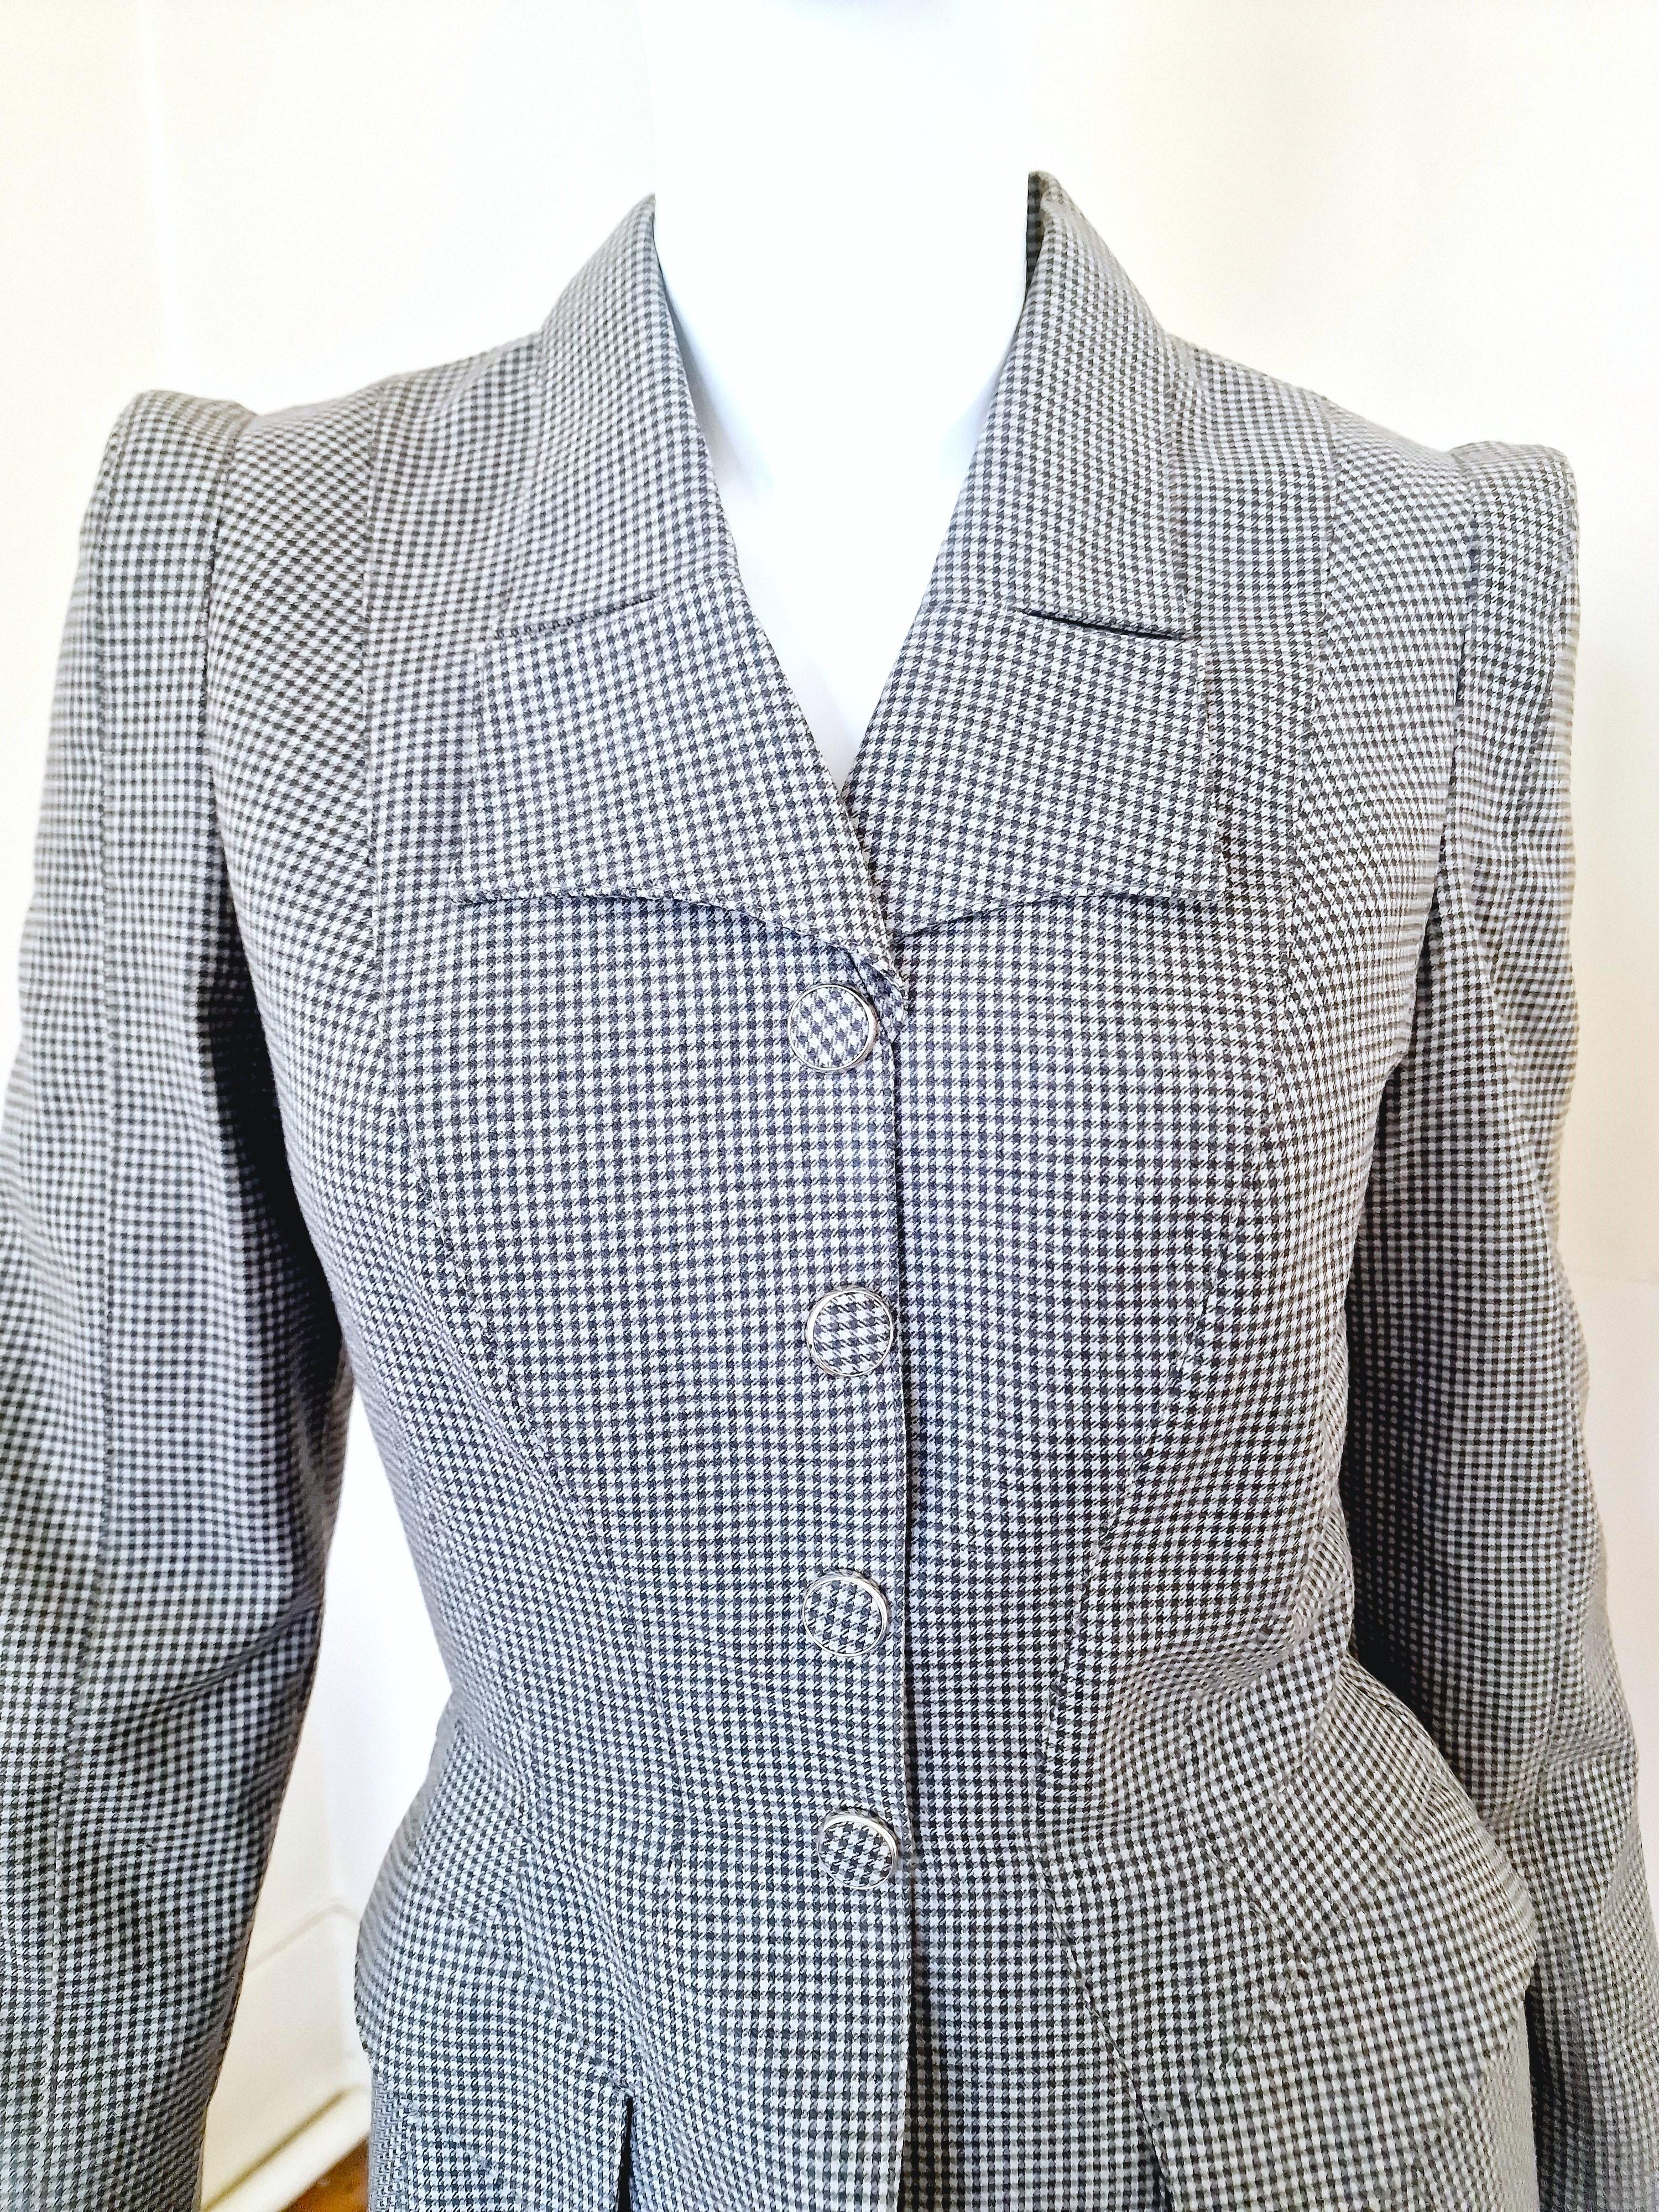 Women's Thierry Mugler Houndstooth Check Evening Vampire XS Dress Set Jacket Skirt Suit For Sale